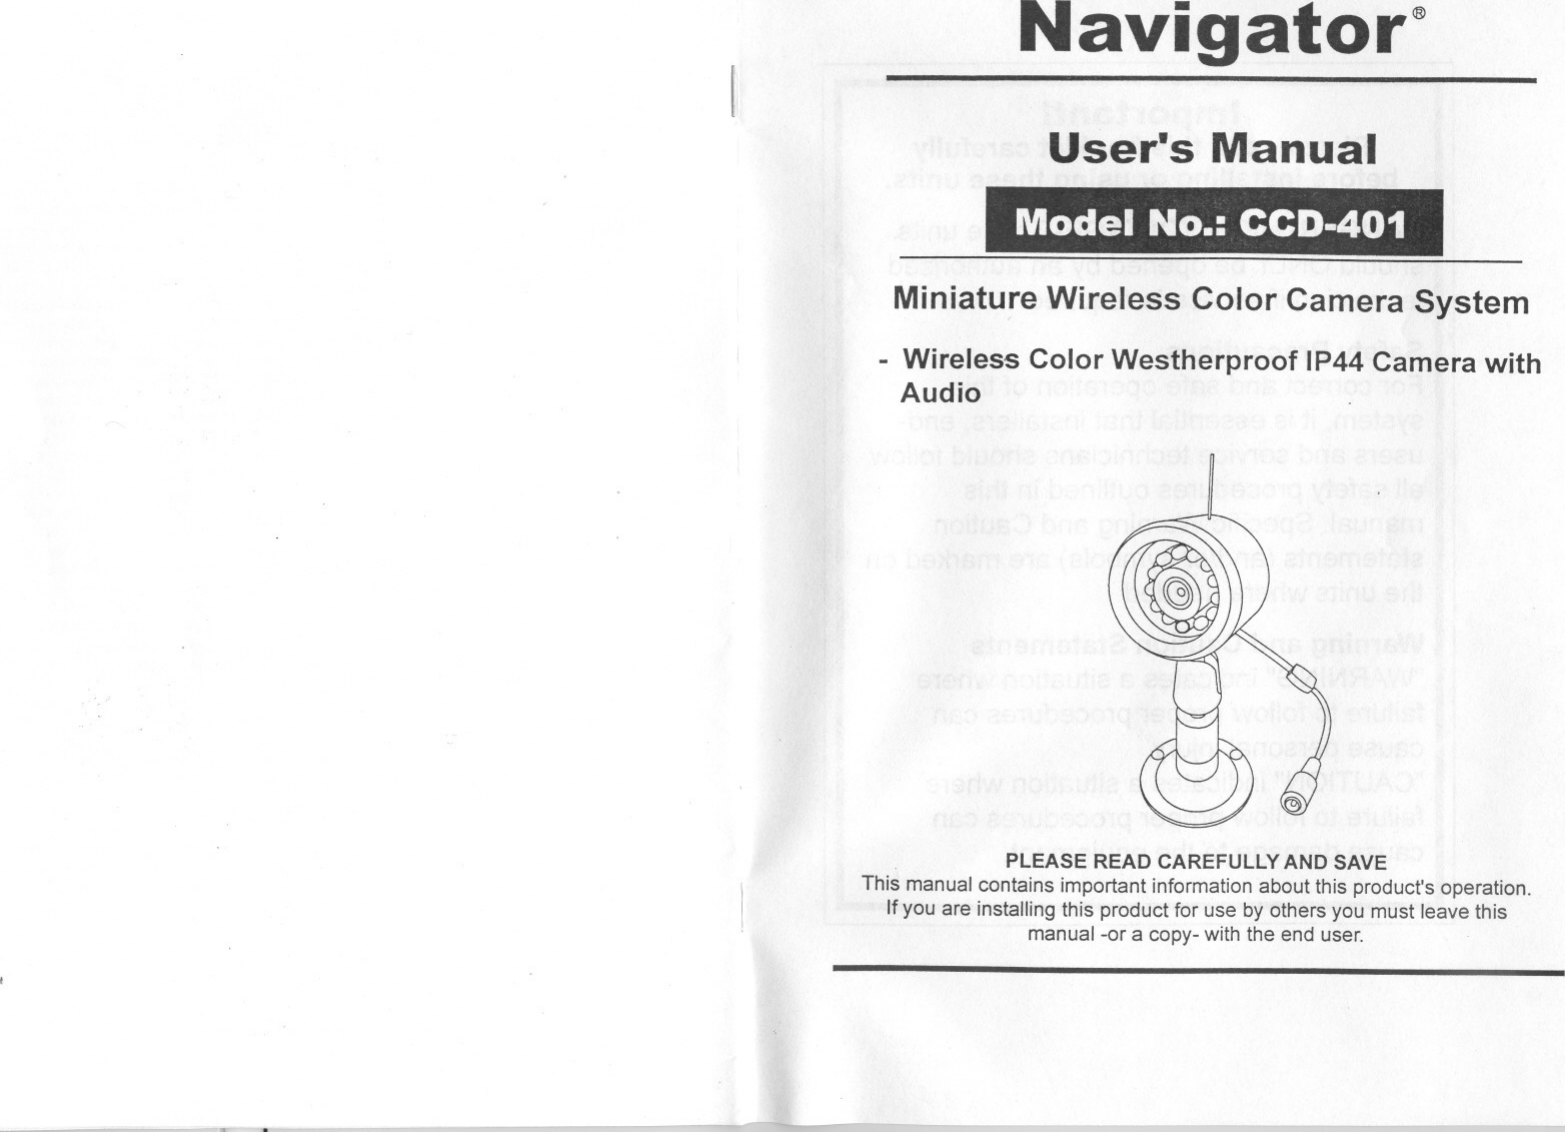 II-Navigator&quot;User&apos;s ManualModel No.: CCD-401Miniature Wireless Color Camera System- Wireless Color Westherproof IP44 Camera withAudioPLEASE READ CAREFULLYAND SAVEThis manual contains important information about this product&apos;soperation.If you are installing this product for use by others you must leave thismanual -or a copy- with the end user.